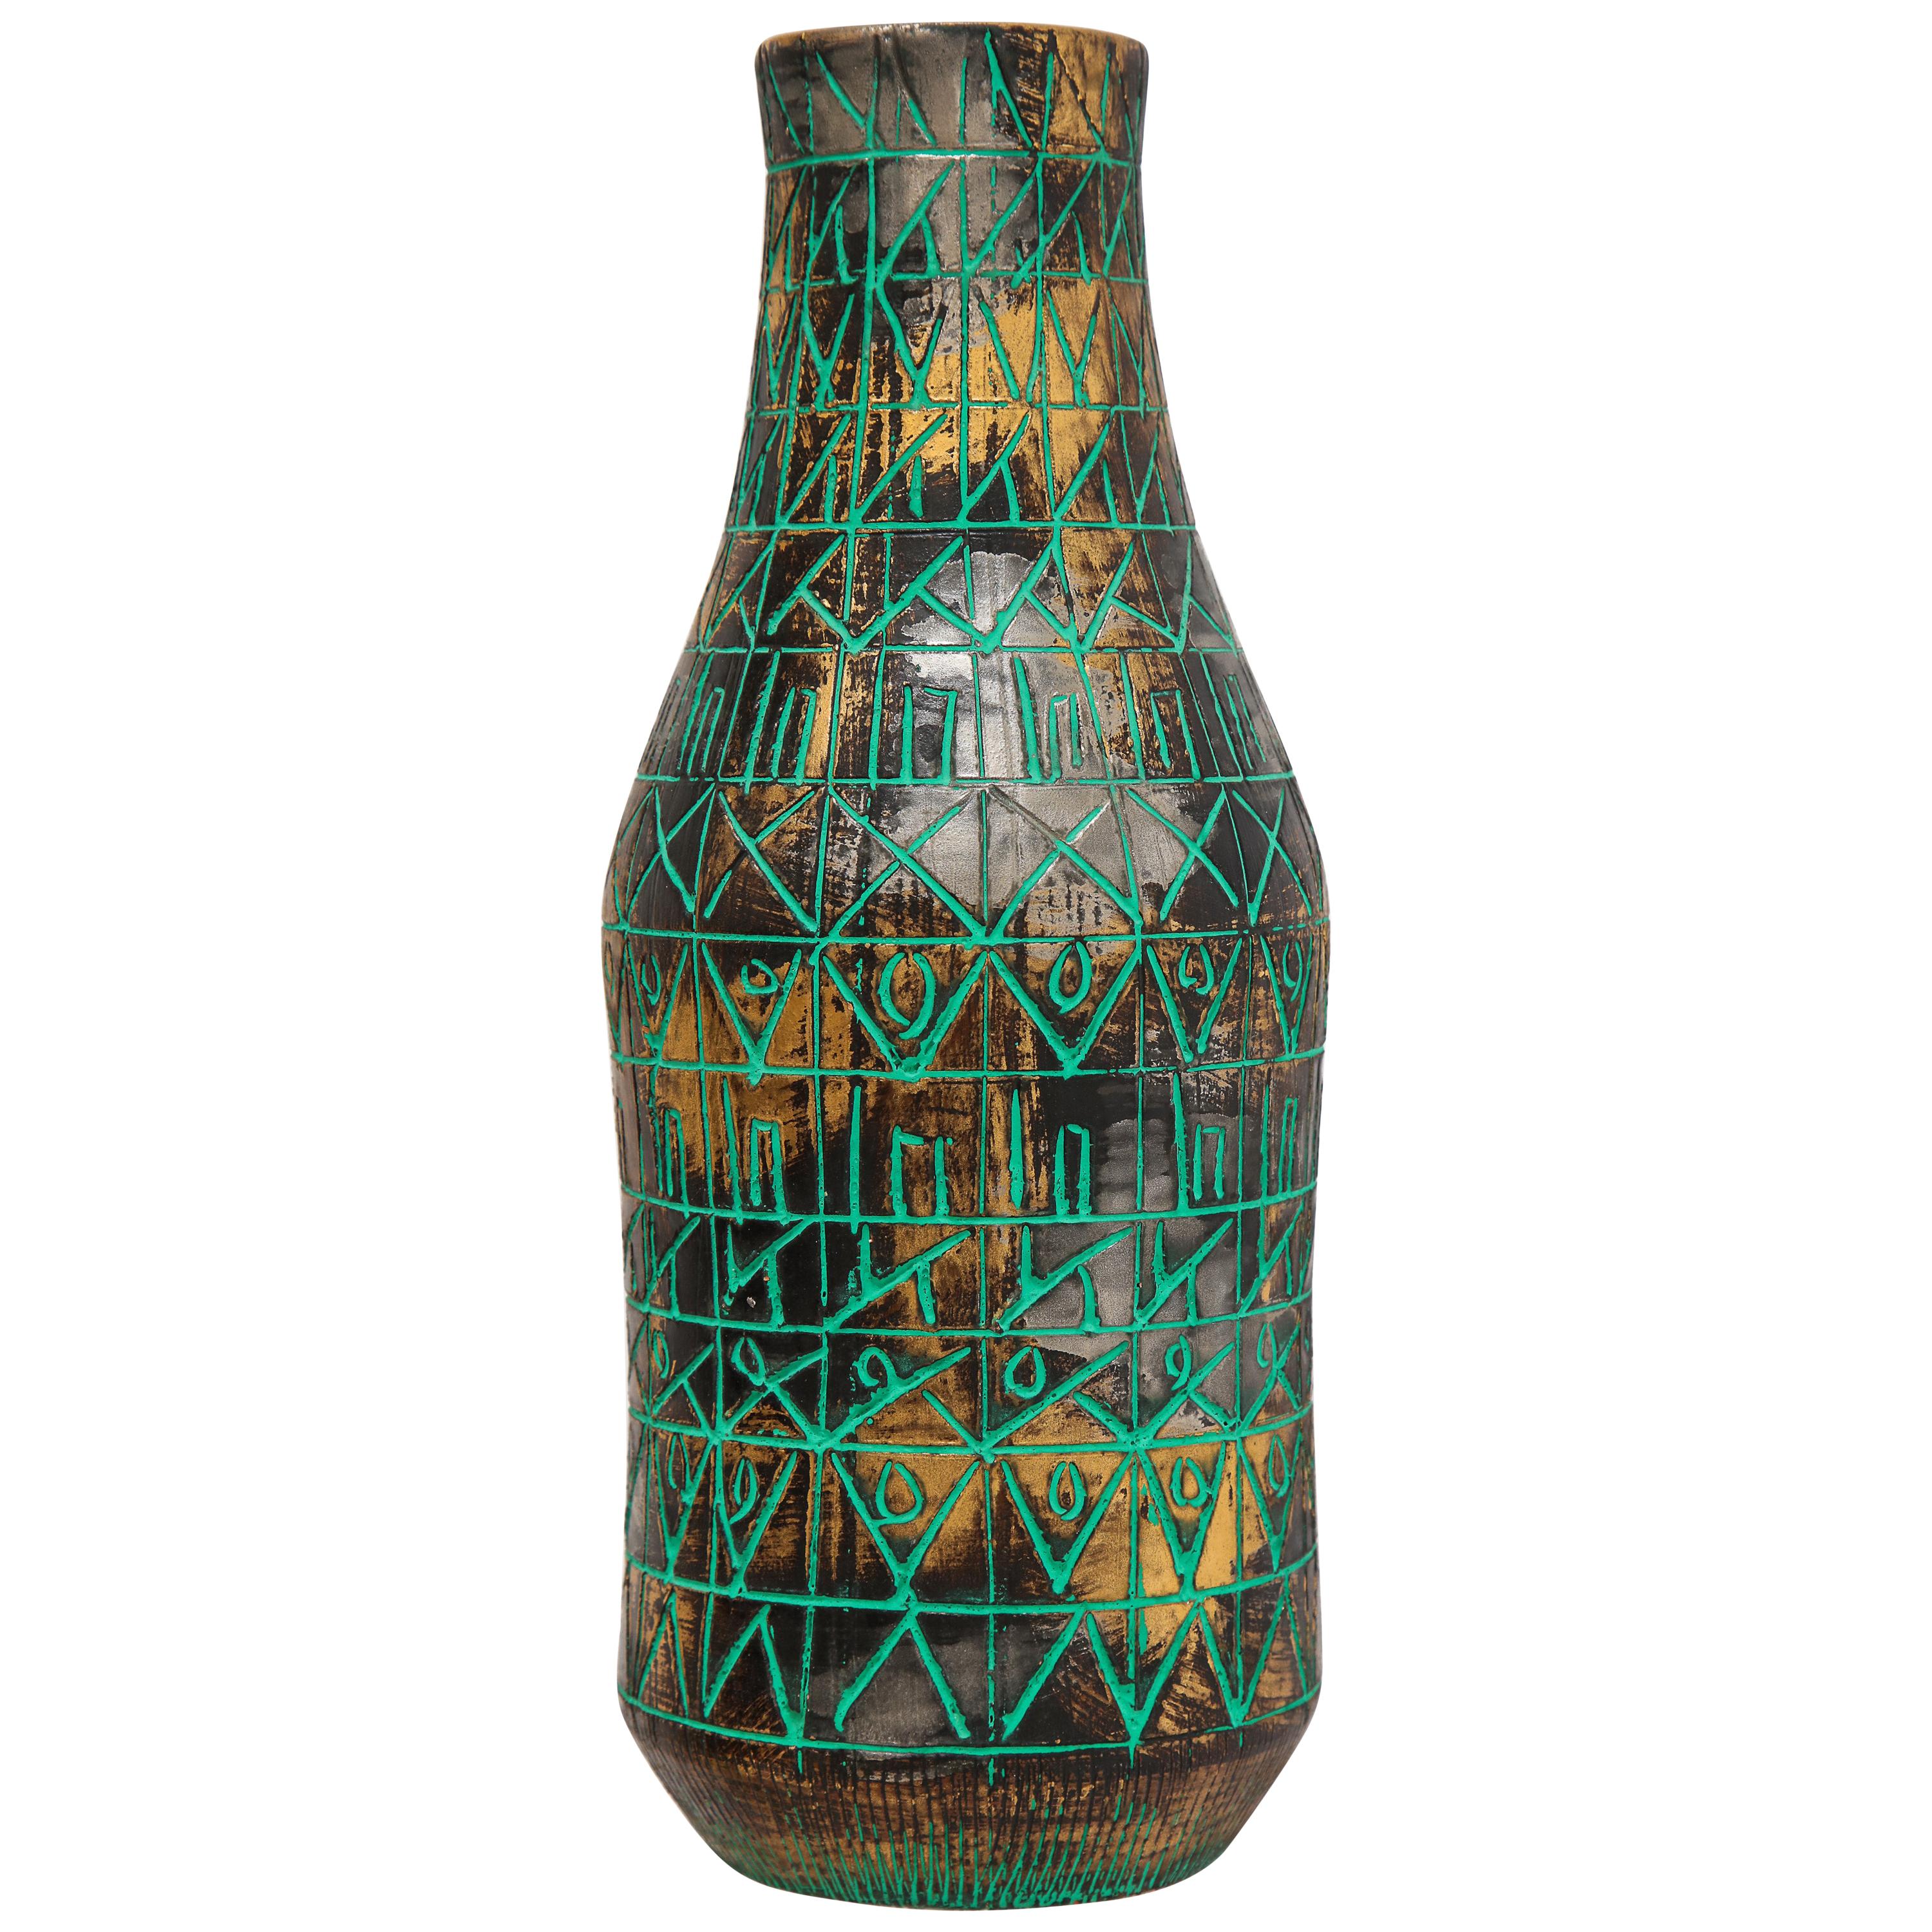 Raymor vase, ceramic, sgraffito, green, gold, chrome, signed. Medium scale bottle form vase decorated with an incised green pattern over gold and dark chrome glazed body. Signed on underside: Raymor, Italy 112. Retains a remnant of a Raymor paper